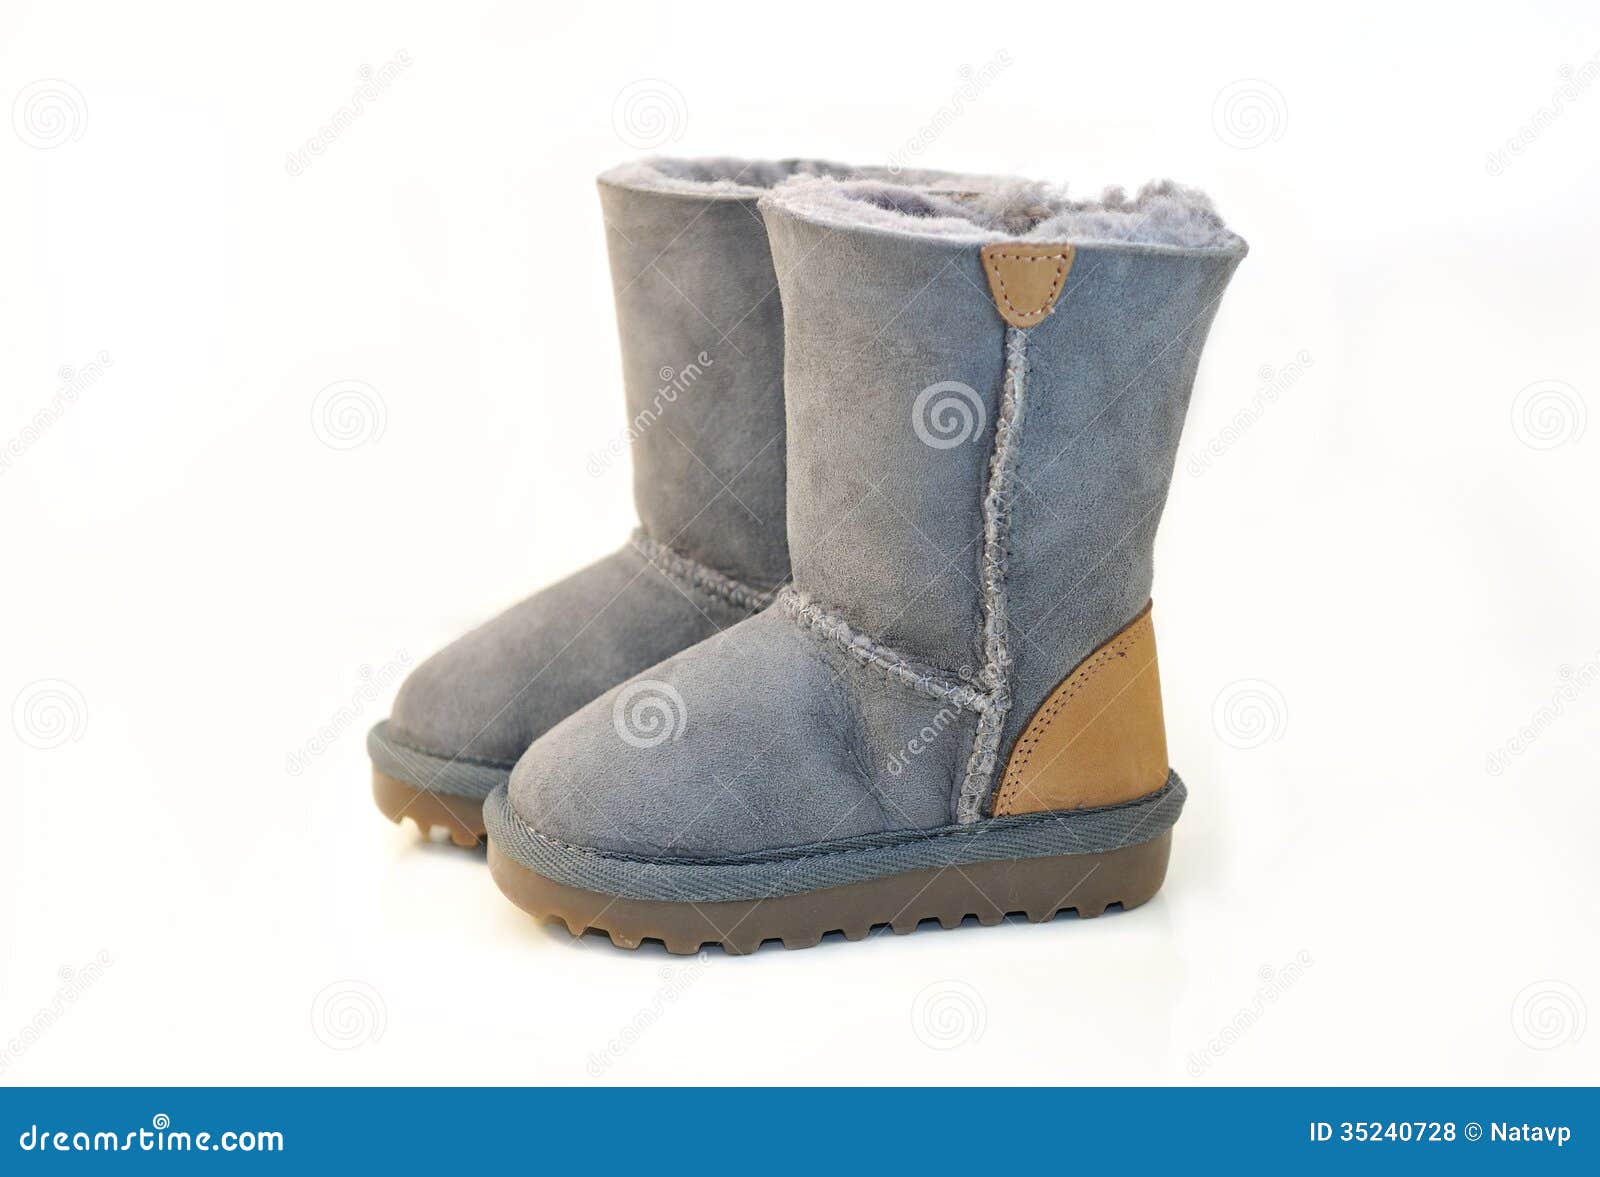 clipart winter boots - photo #35